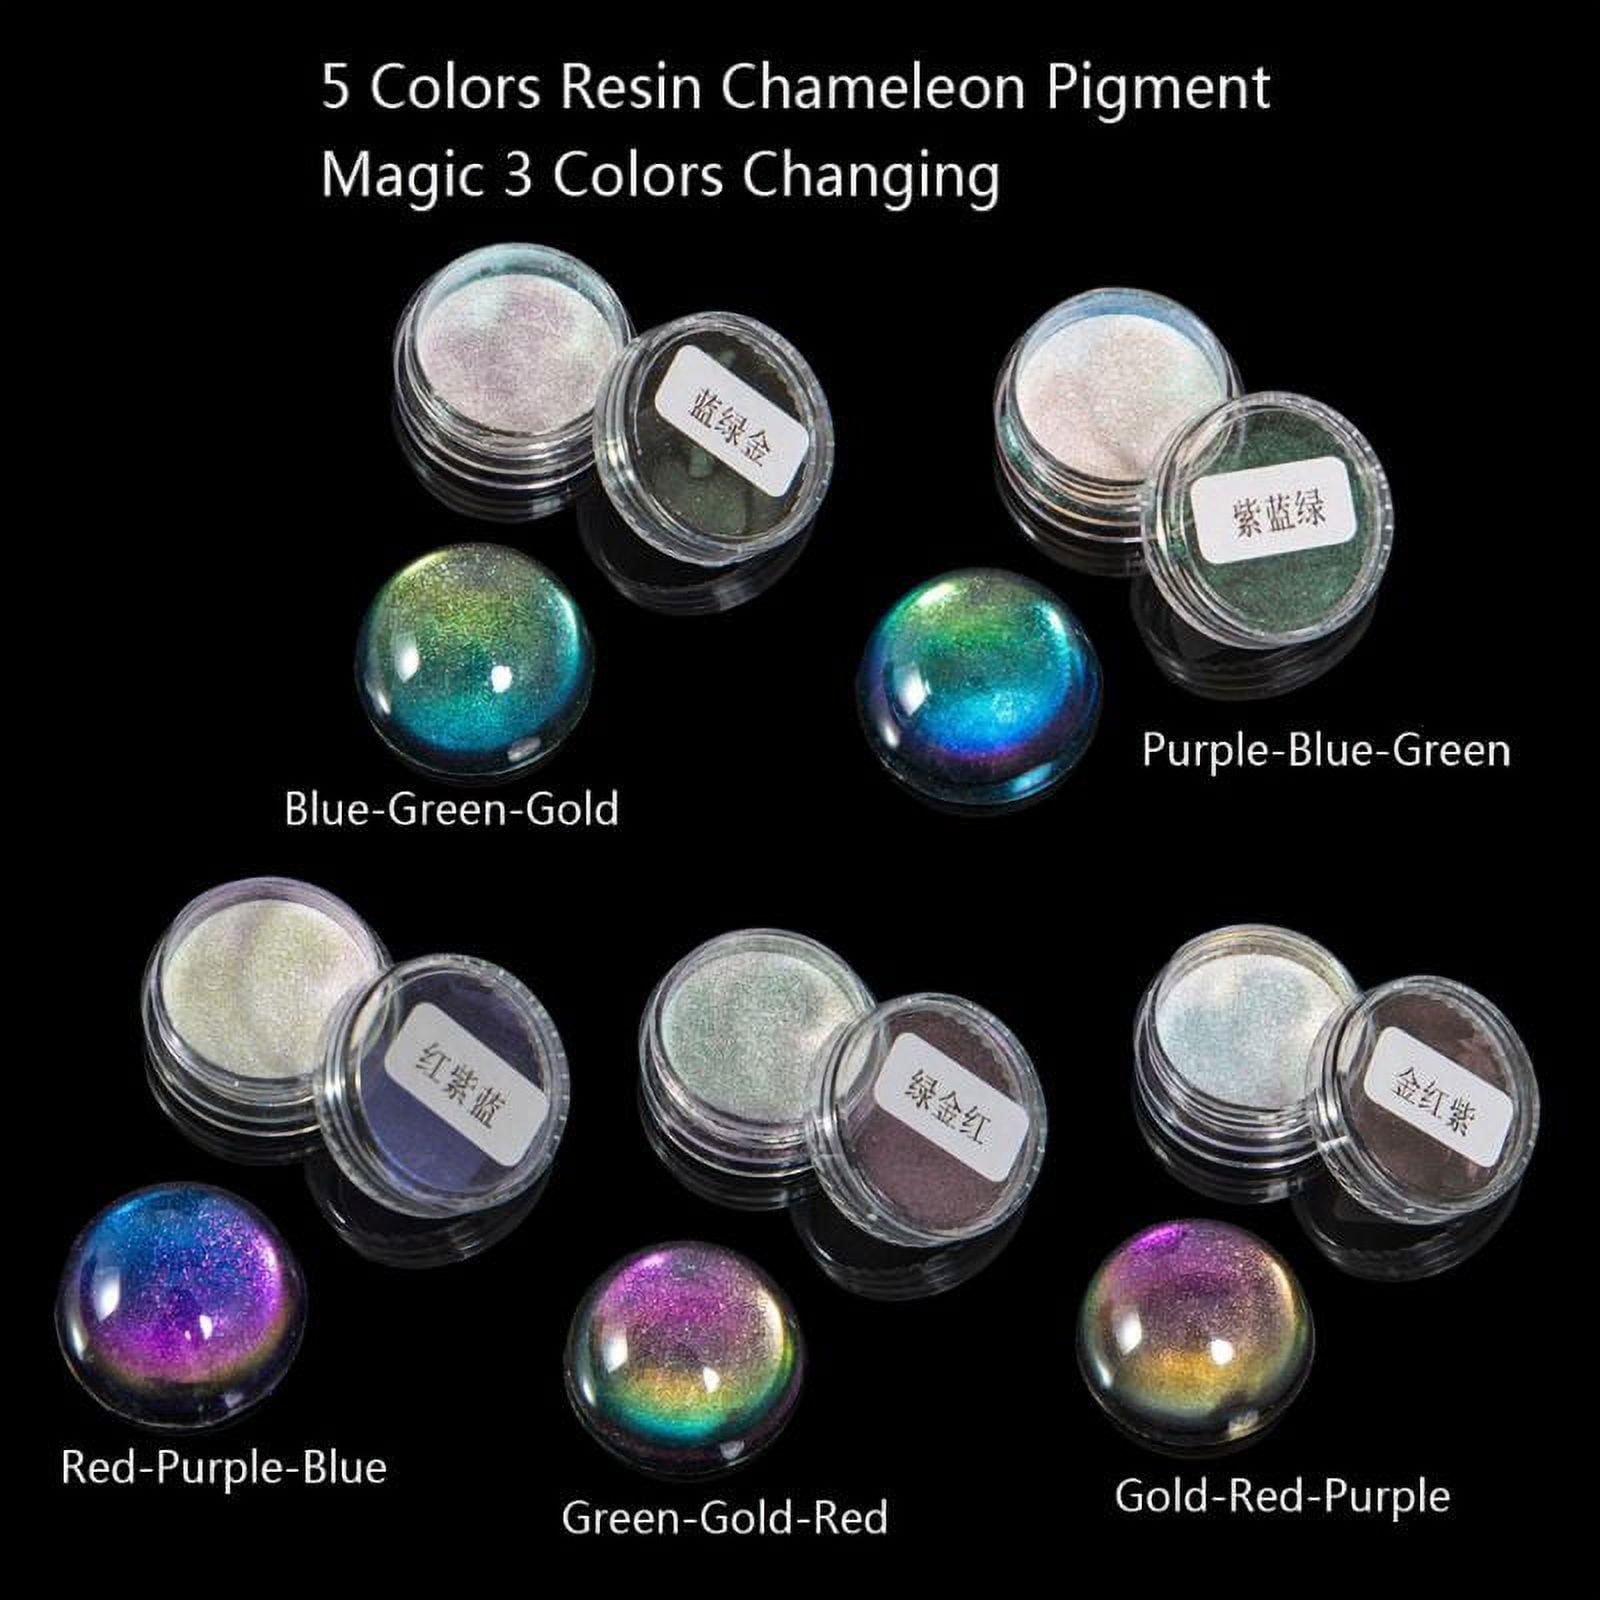 Jewel Color Pigment Dye (Made in Japan), Padico Resin Craft Dye, Resin  Pigment Colorant, Shimmer Pearl Color, Resin Dye, Resin Coloring